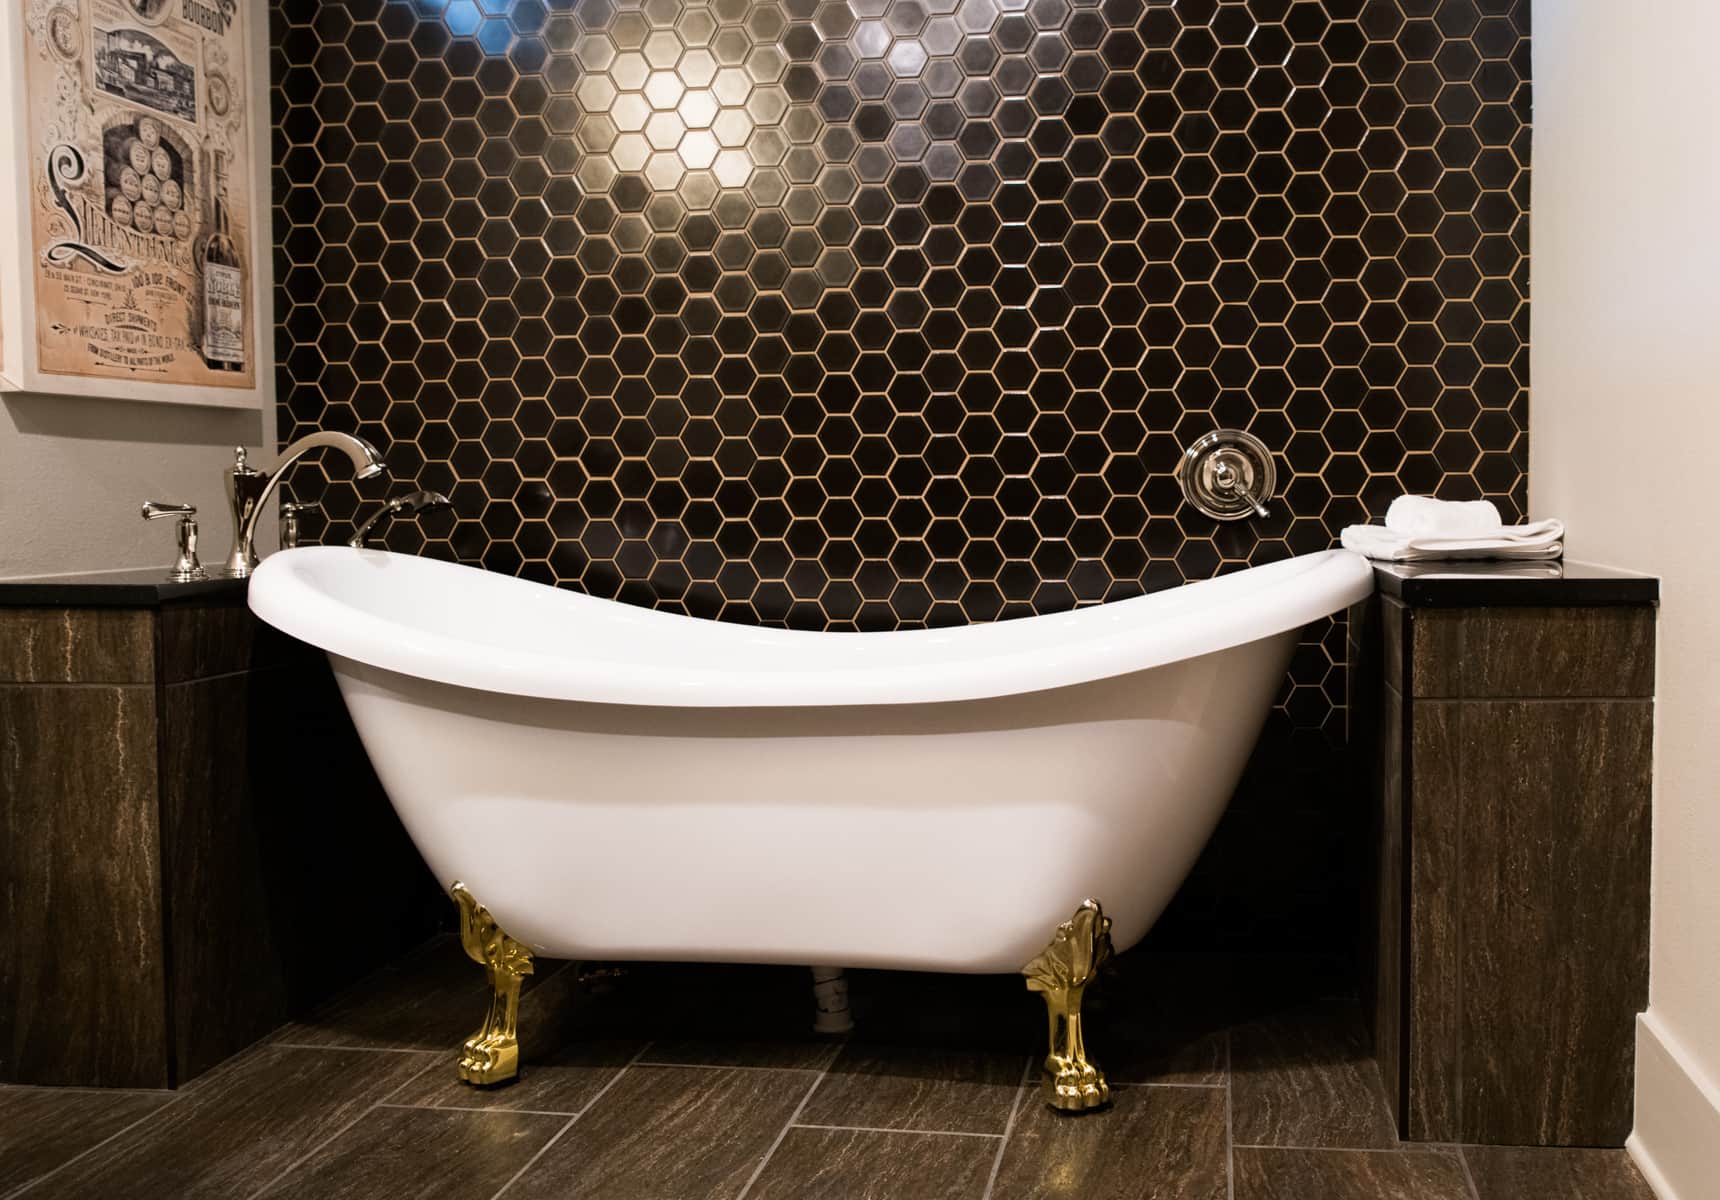 Clawfoot tub with a black hexagon tiles